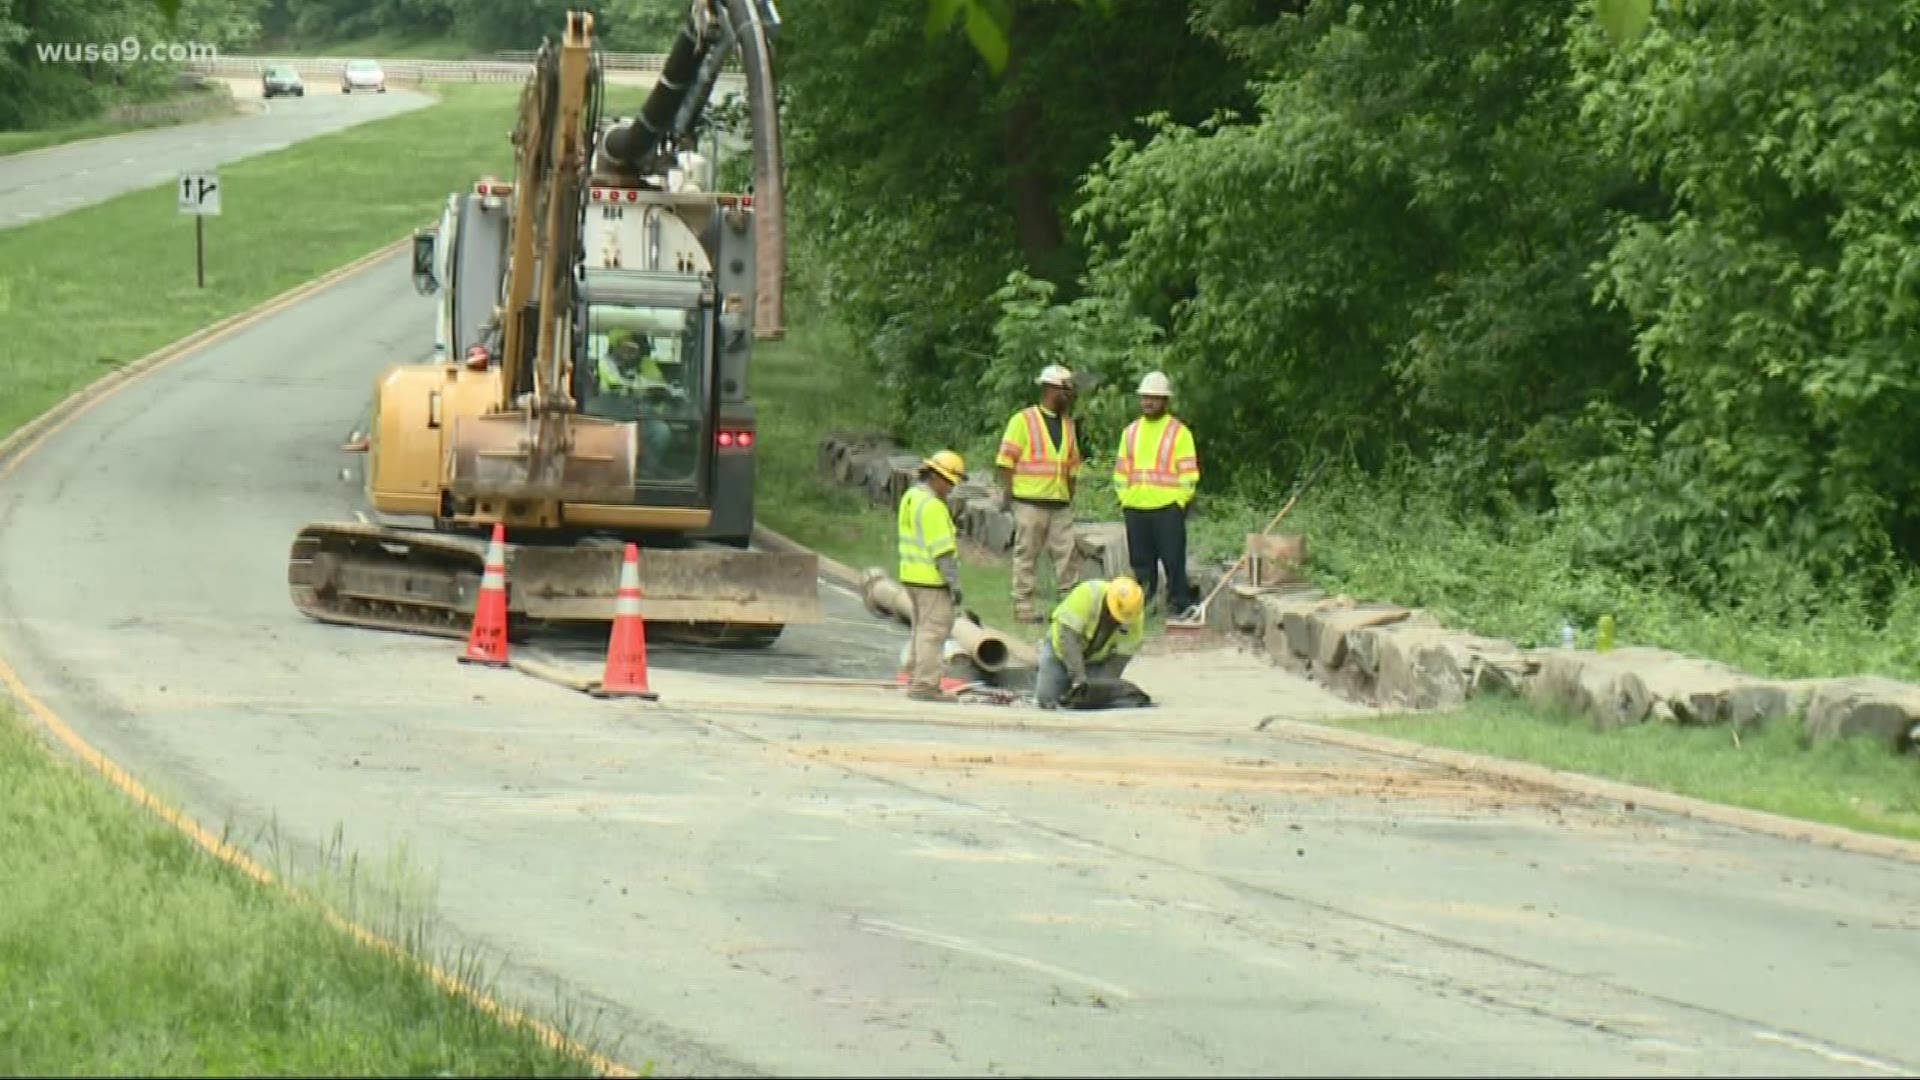 They hope to have one lane open by Monday morning's rush hour, but fully repairing the parkway is part of a long term plan.